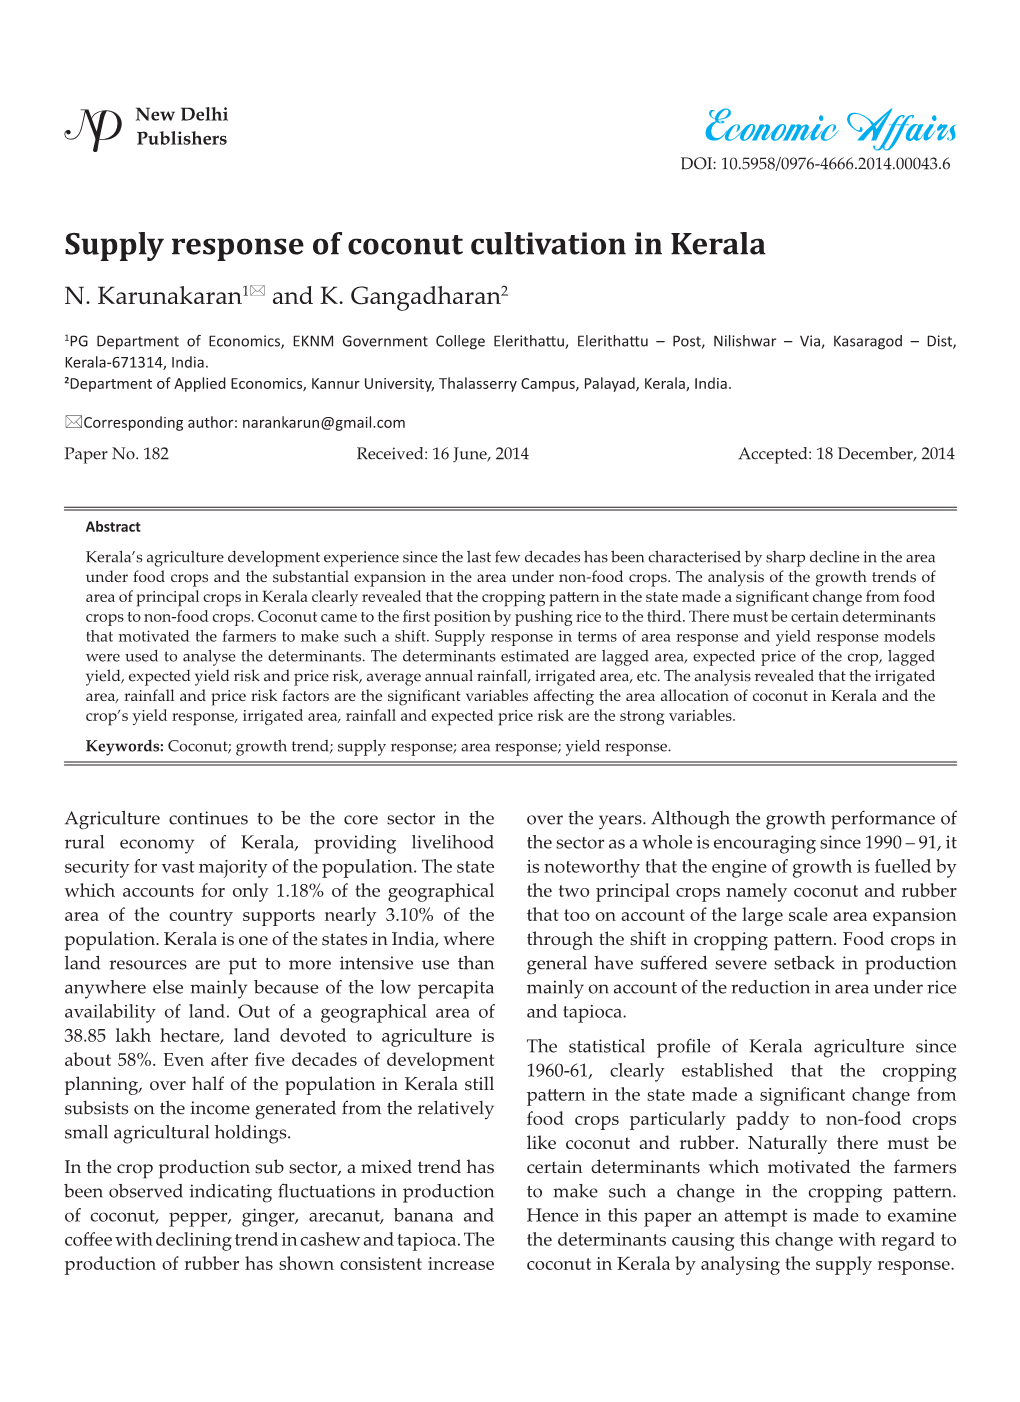 Supply Response of Coconut Cultivation in Kerala N